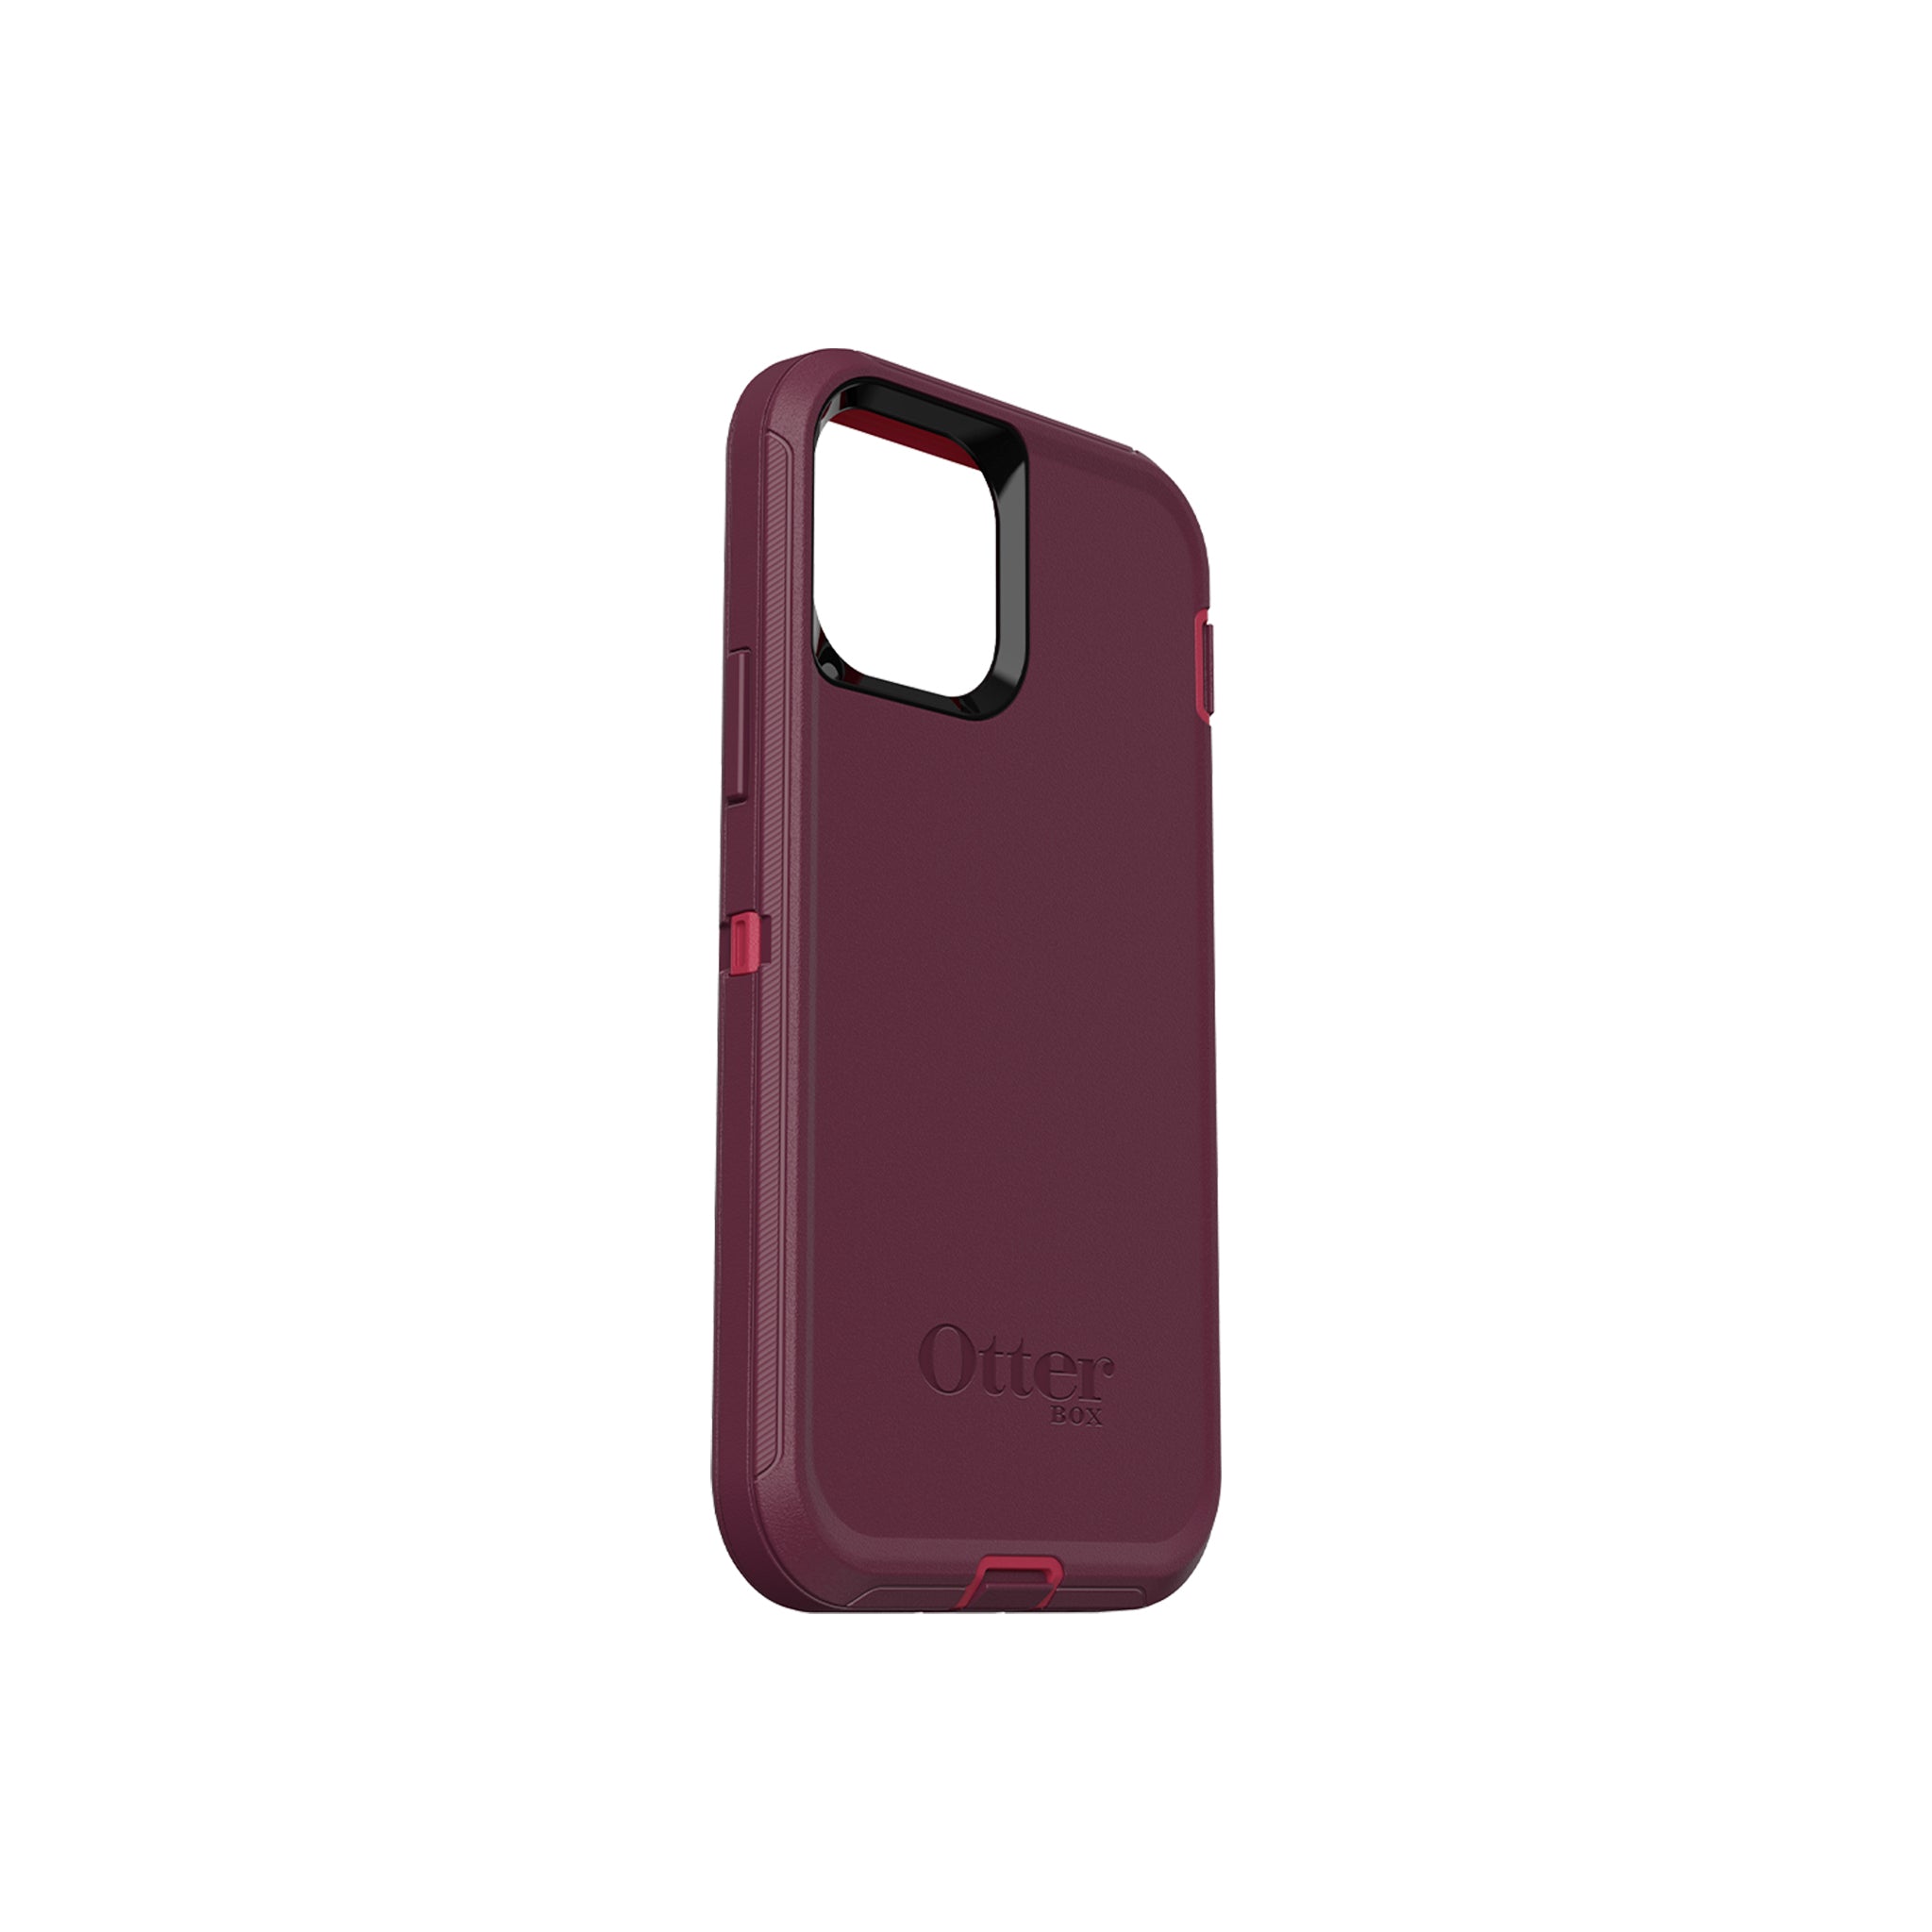 OtterBox - Defender fo iPhone 12 / 12 Pro - Berry Potion